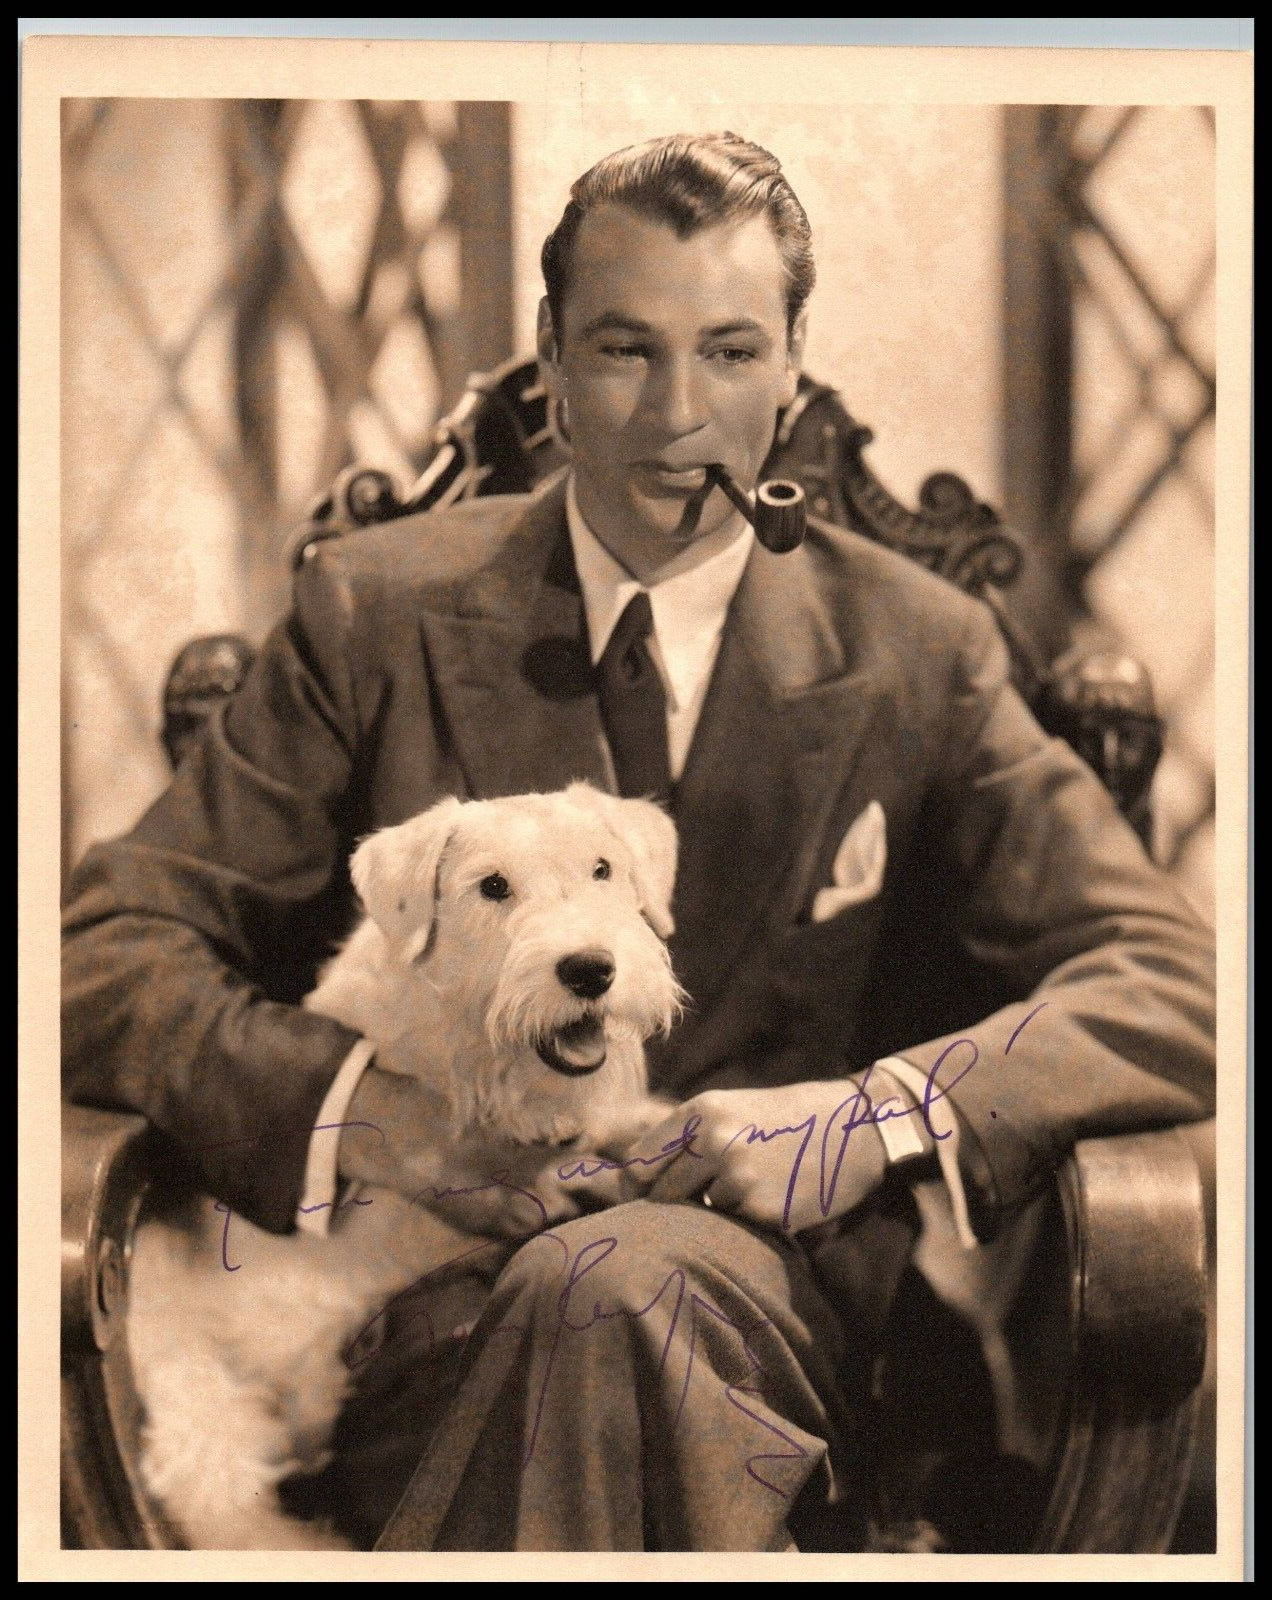 HOLLYWOOD LEGEND GARY COOPER 1930s SIGNED AUTOGRAPH HANDSOME PORTRAIT PHOTO 702